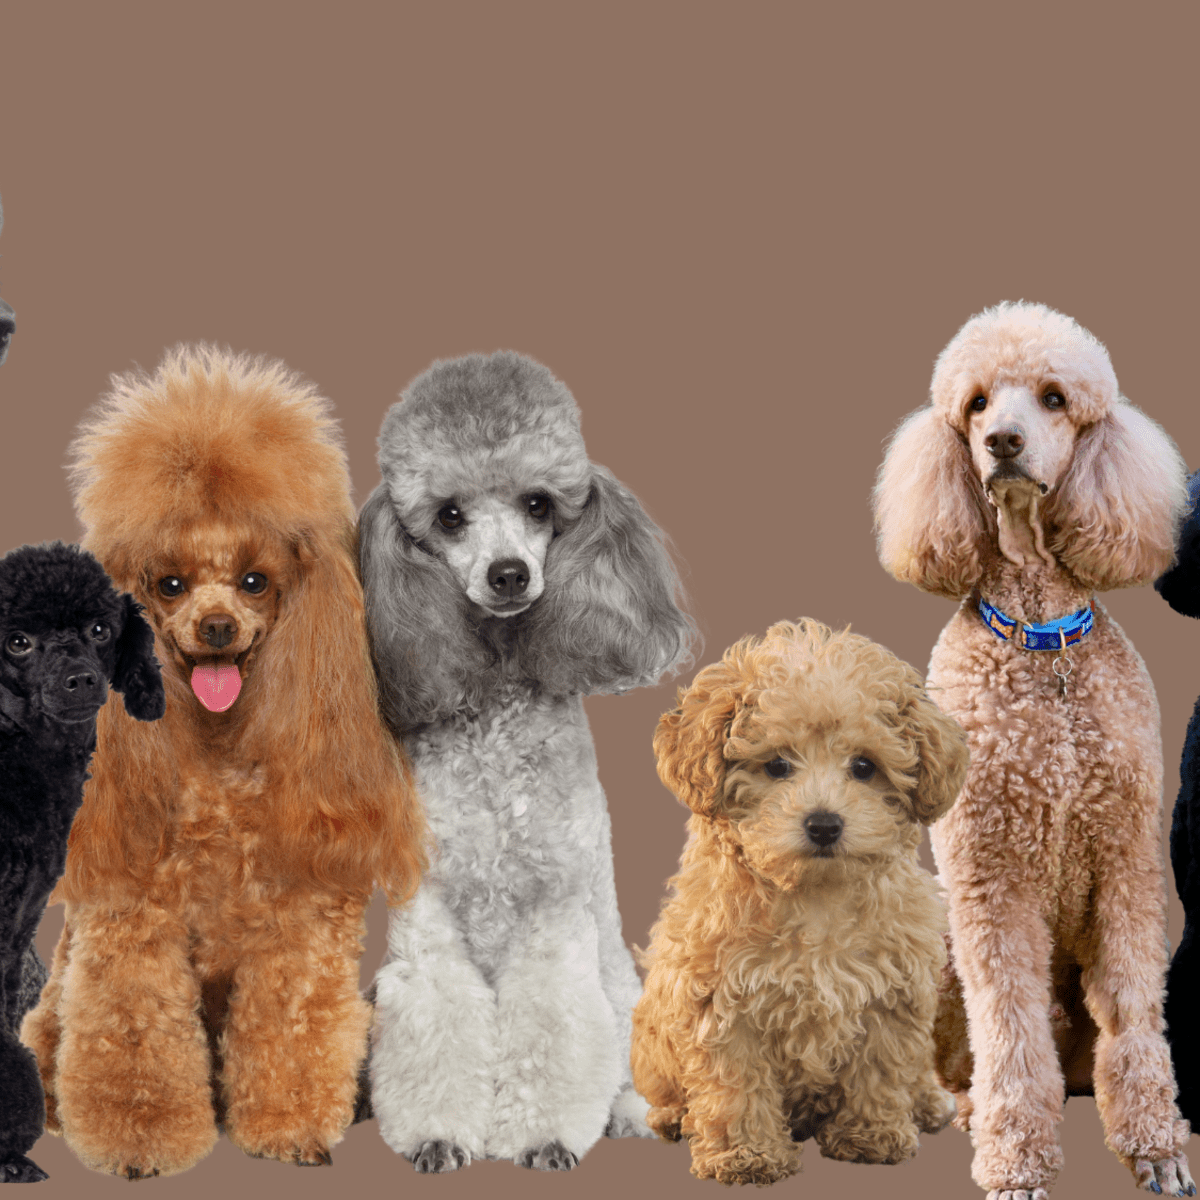 https://images.saymedia-content.com/.image/ar_1:1%2Cc_fill%2Ccs_srgb%2Cq_auto:eco%2Cw_1200/MTk4OTY2OTY3ODM3NjY1MjM2/different-types-of-poodle-dog-breed-information-pictures-characteristics.png